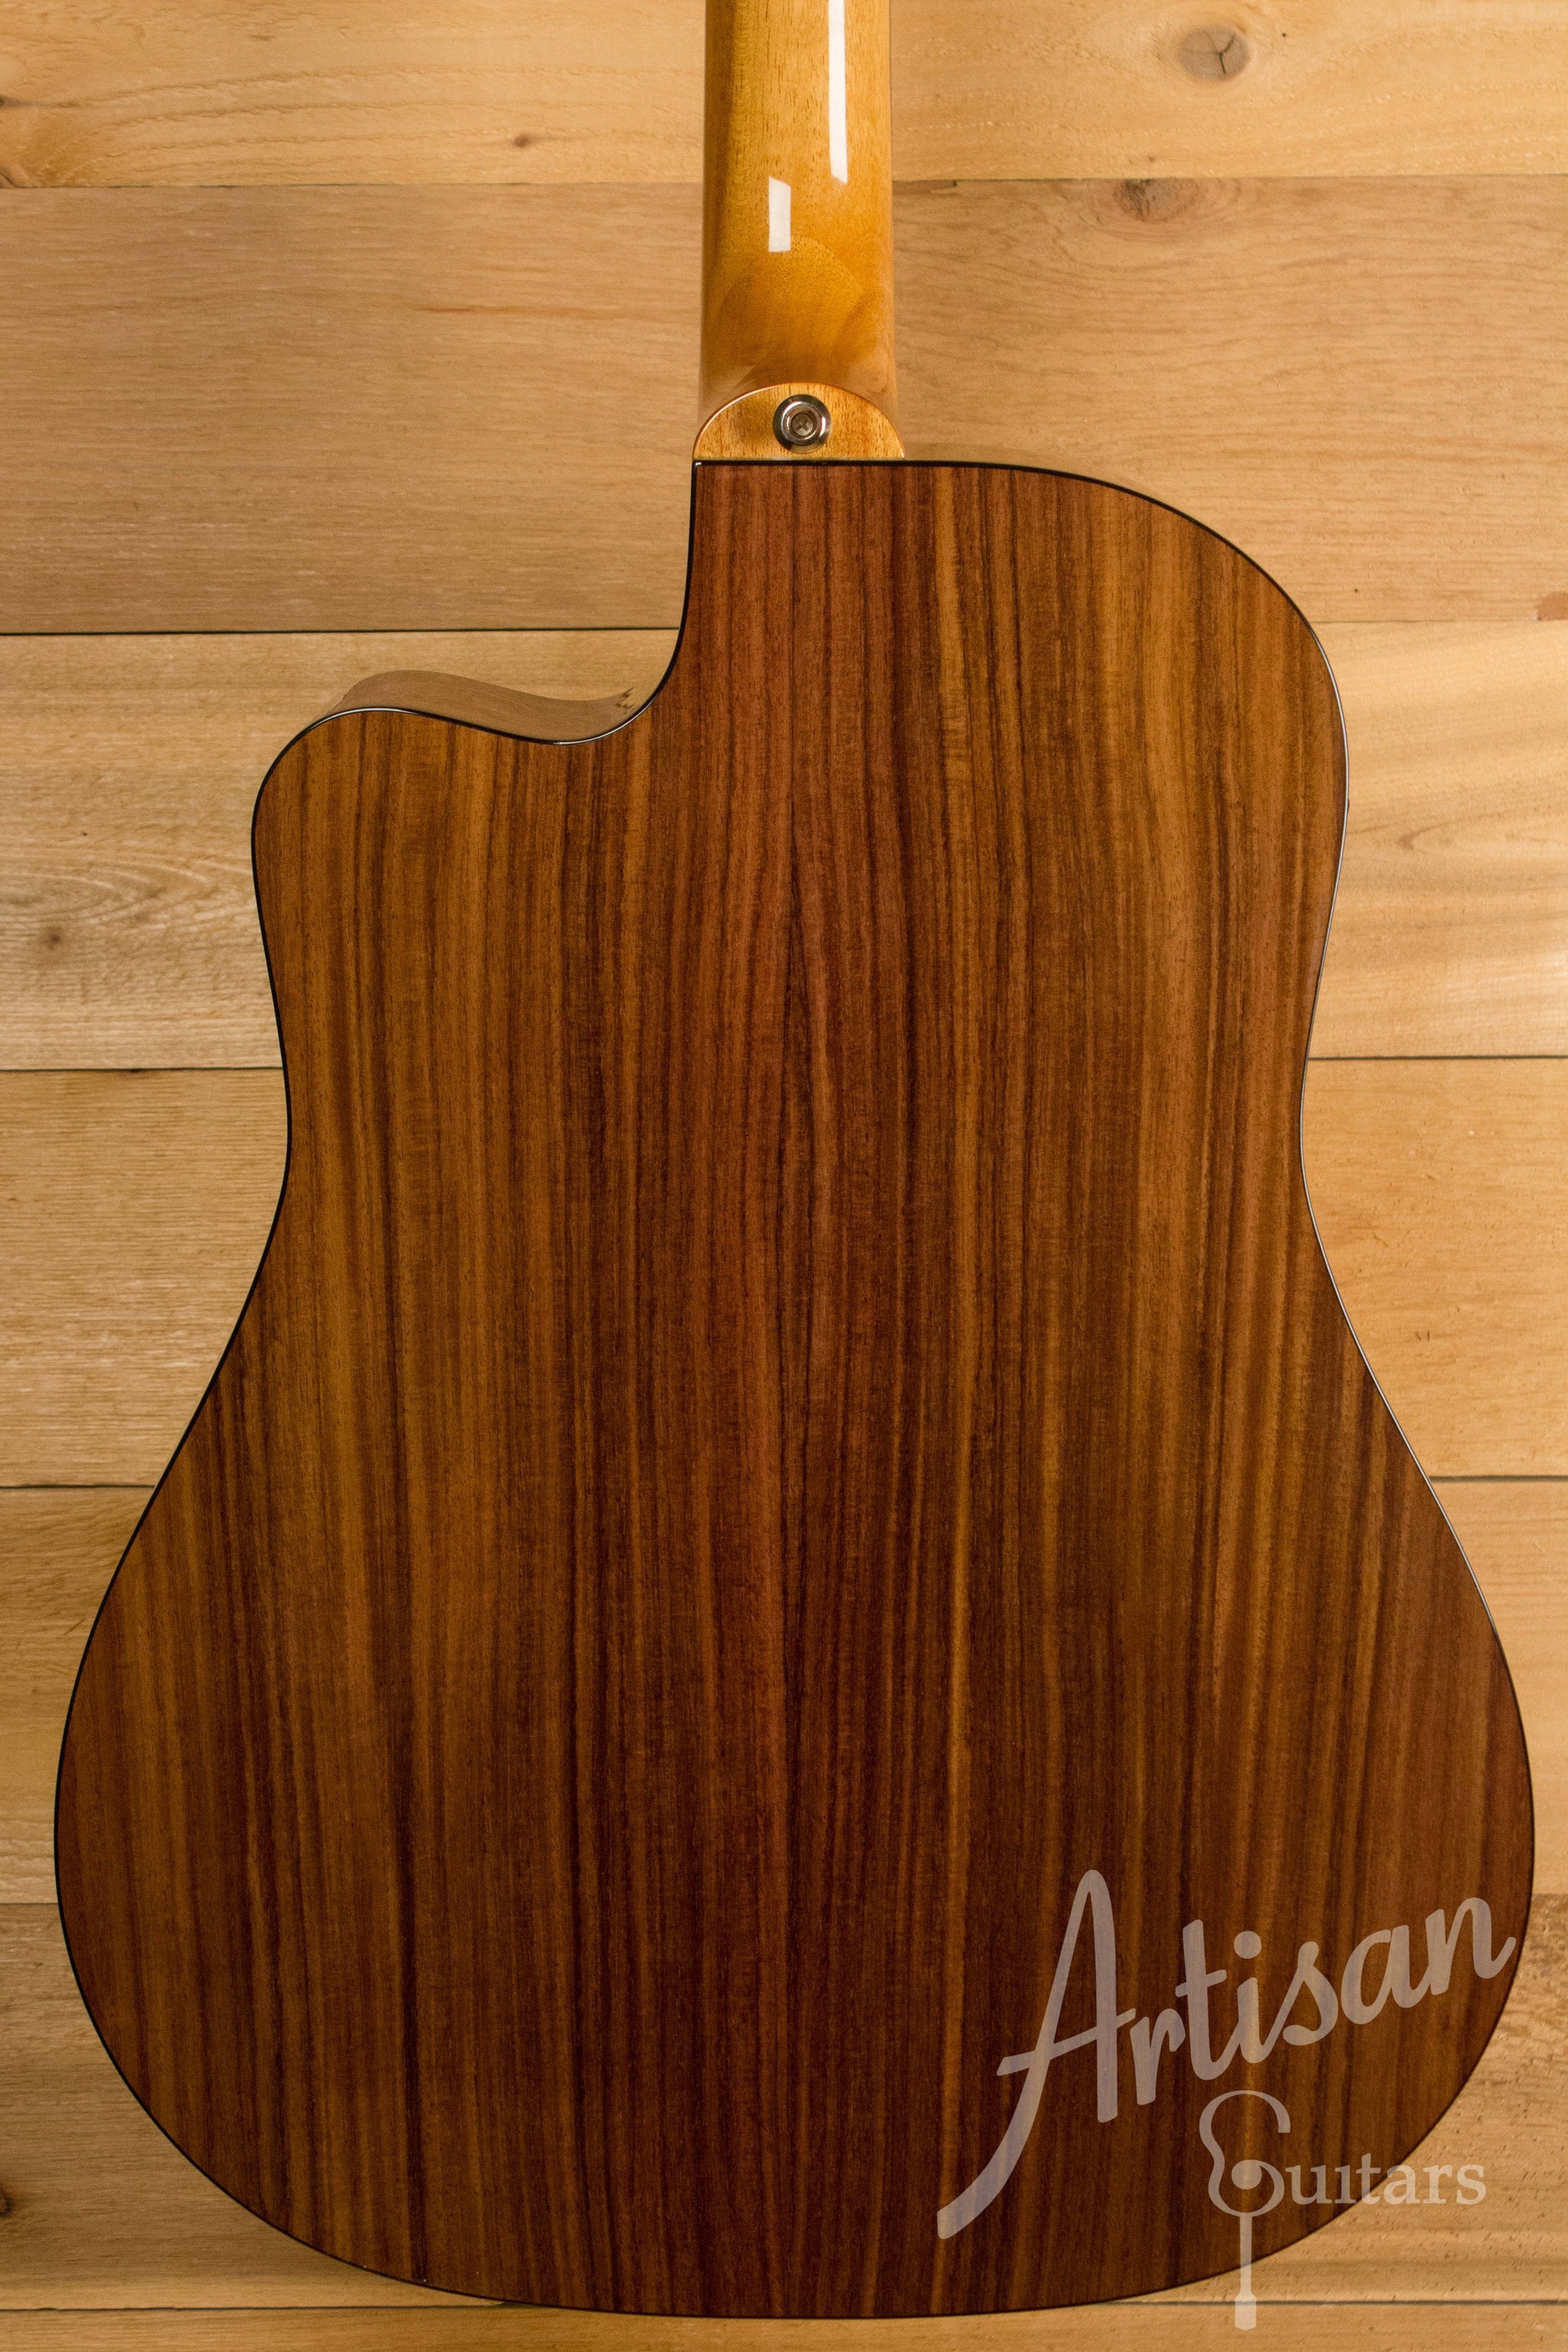 Maton TE1 Guitar Tommy Emmanuel Artist Sitka Spruce and Indian Rosewood AP5 Pro Pre-Owned 2014 ID-11174 - Artisan Guitars